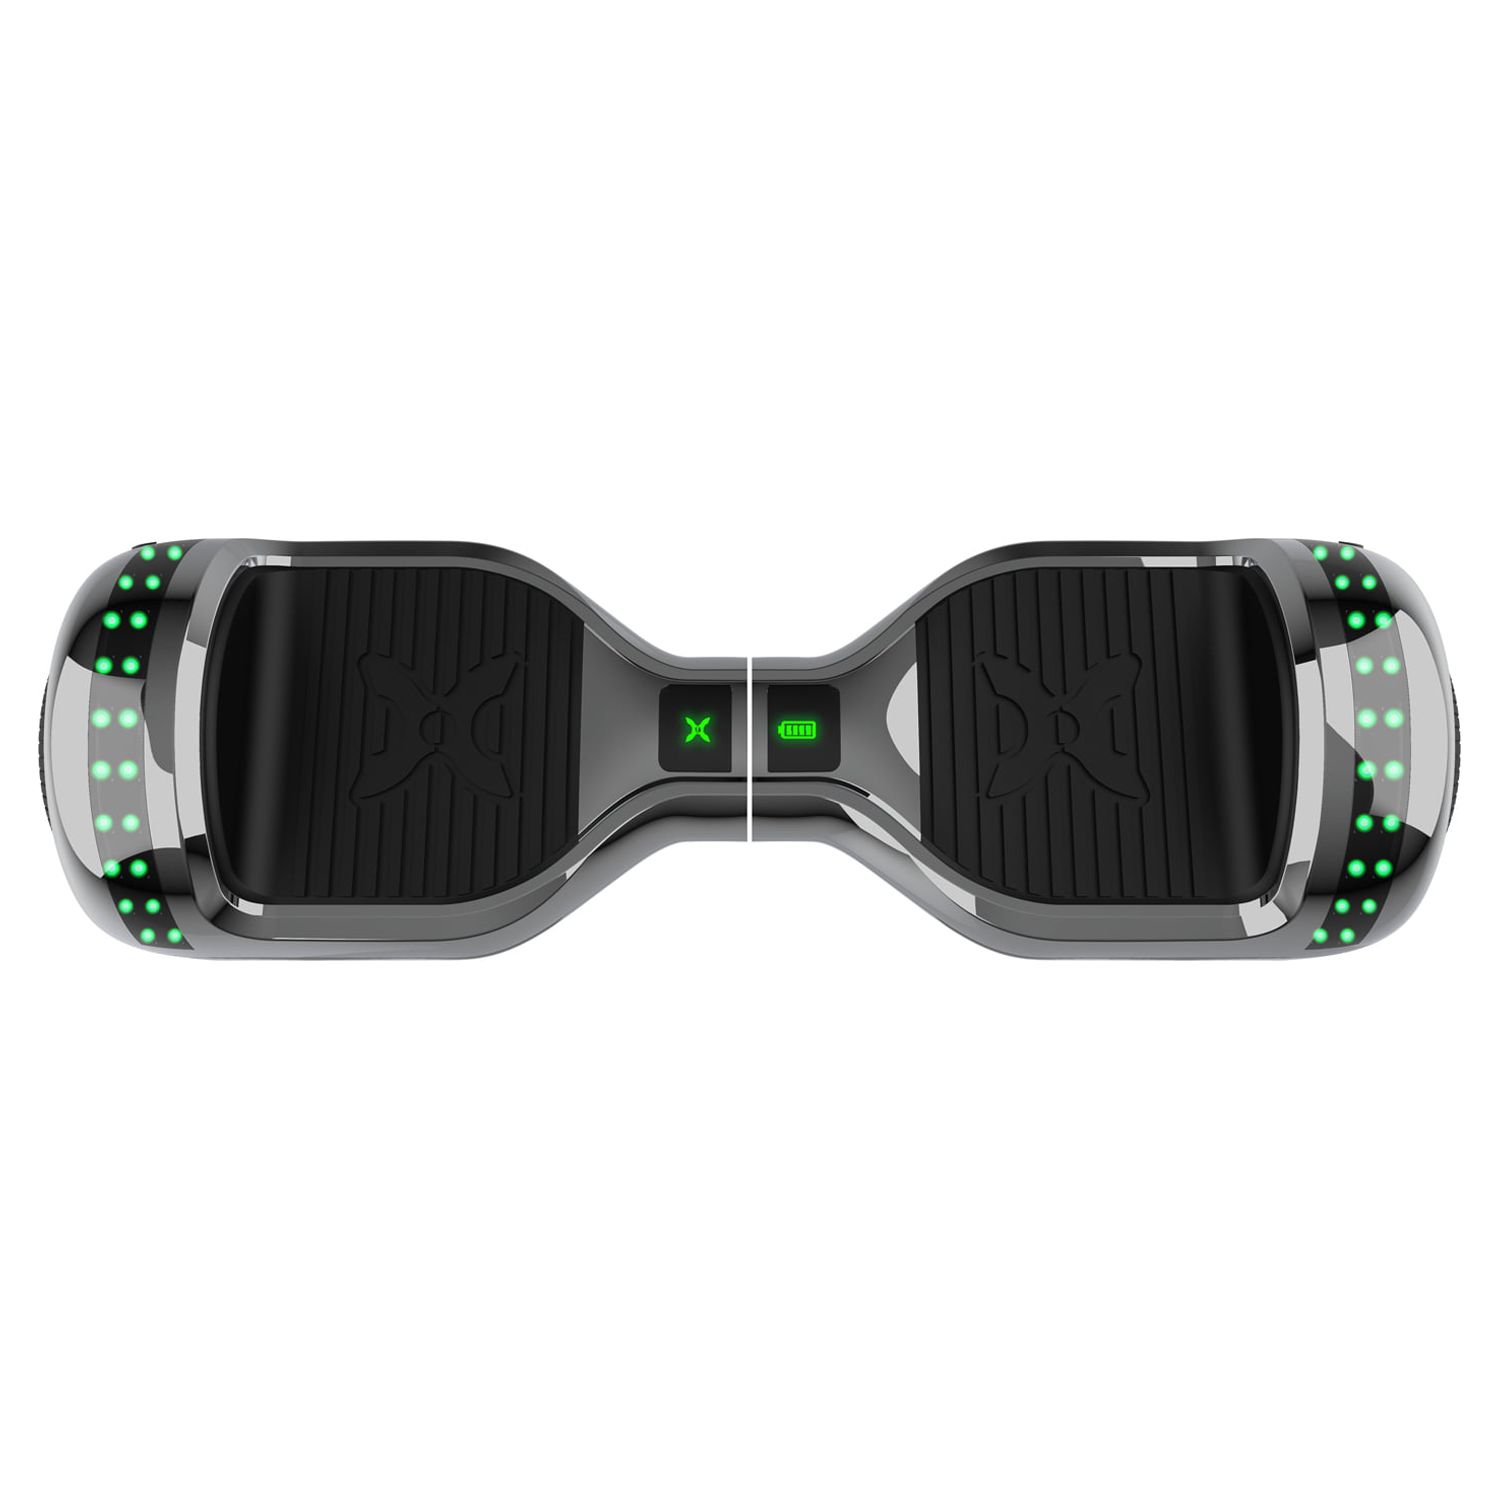 Hover-1 Matrix Hoverboard For Teens, 6.5 in Wheels, 180 lb Maximum Weight, LED Lights & Bluetooth Speaker, Silver - image 5 of 12